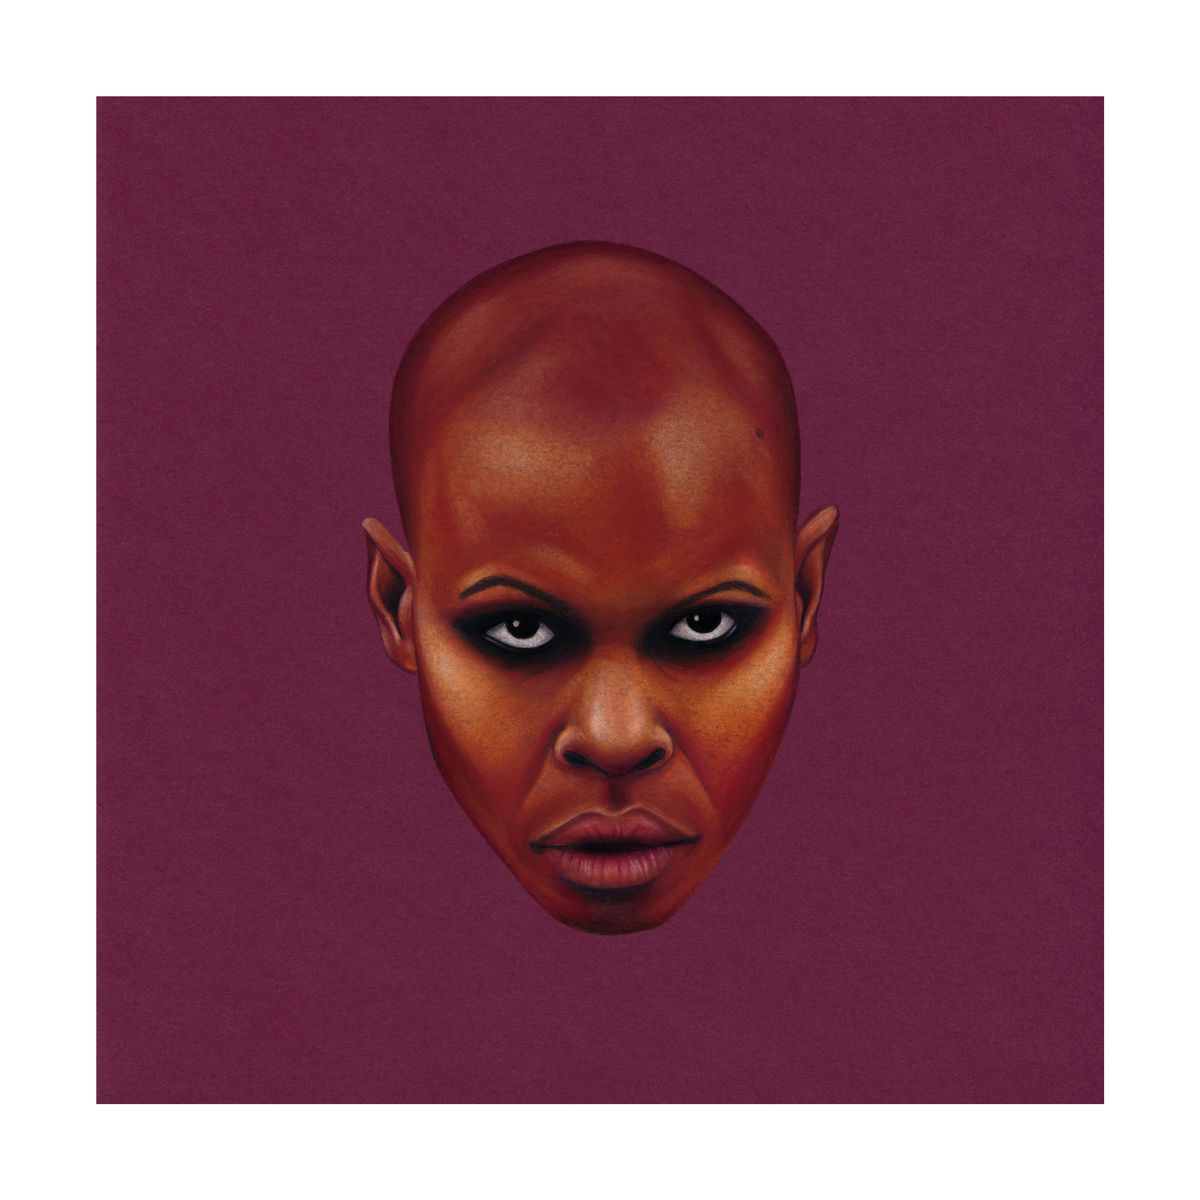 A portrait of Skunk Anansie front woman, Skin. Colour Pencil on Card. Available as a Giclee Print.